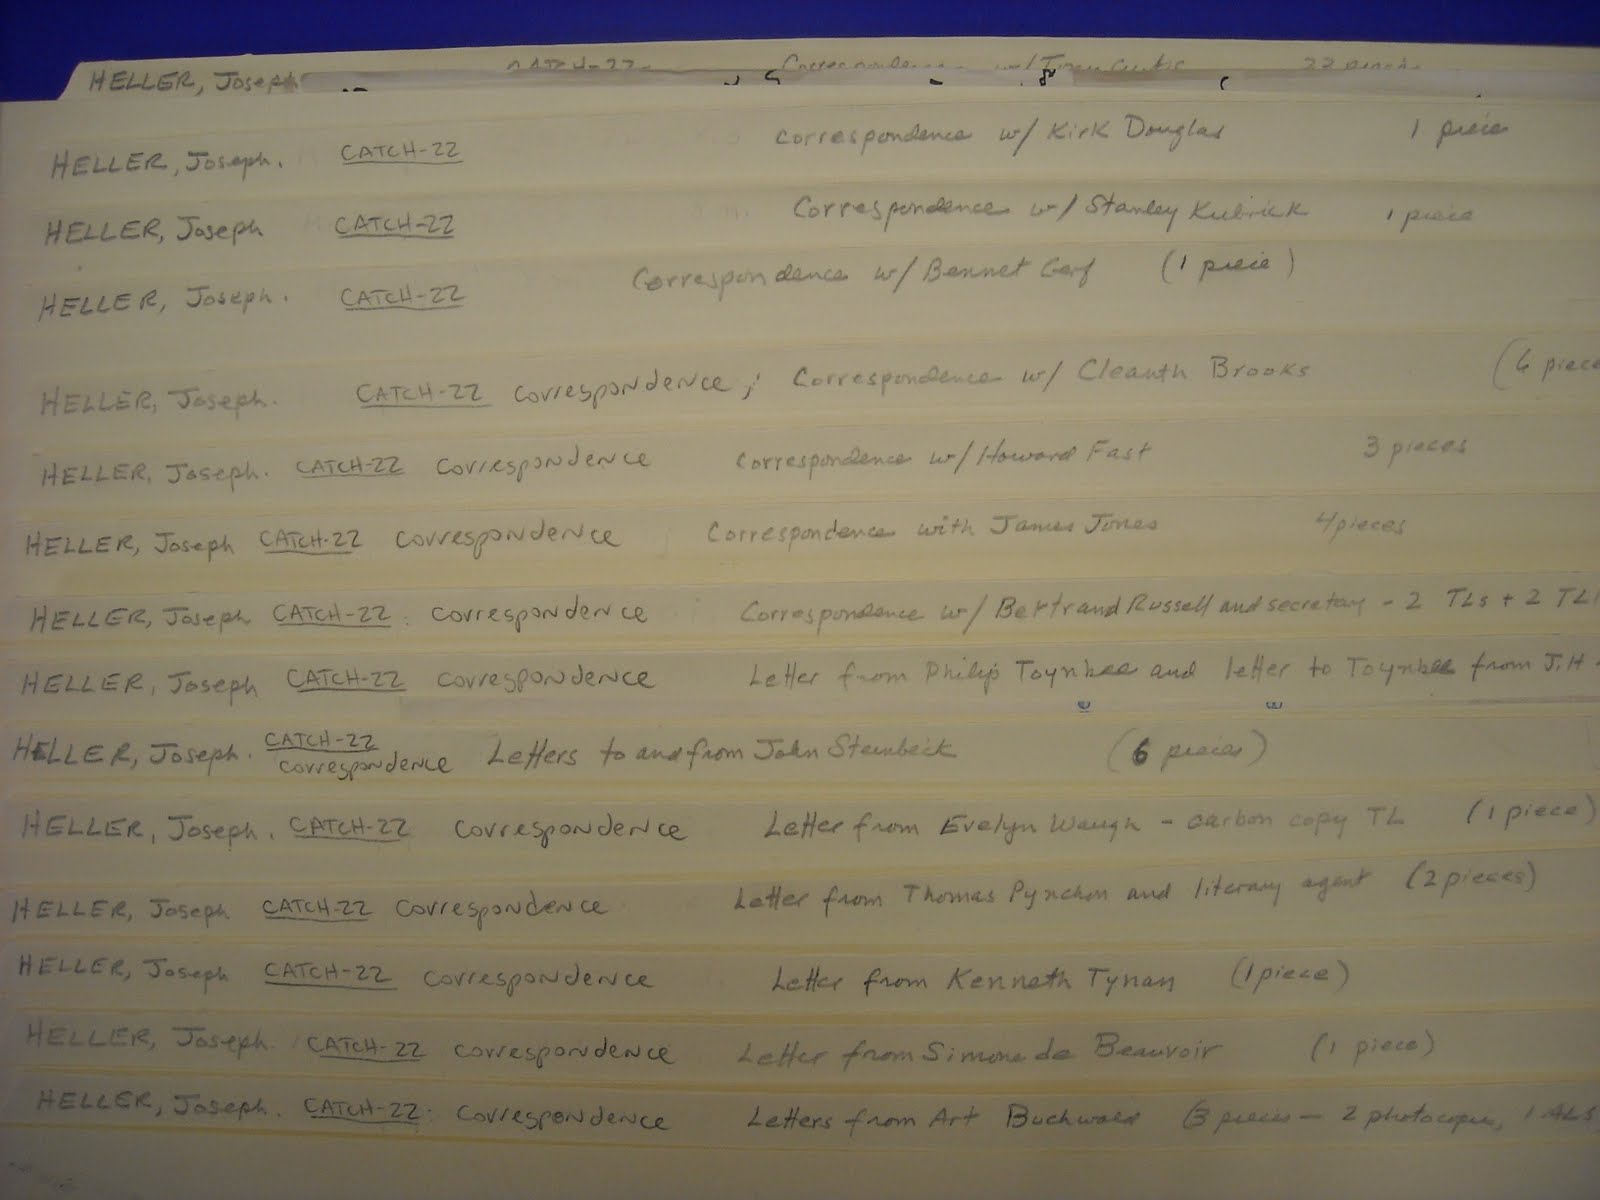 Folder labels for Joseph Heller Catch-22 correspondence in the Brandeis collection